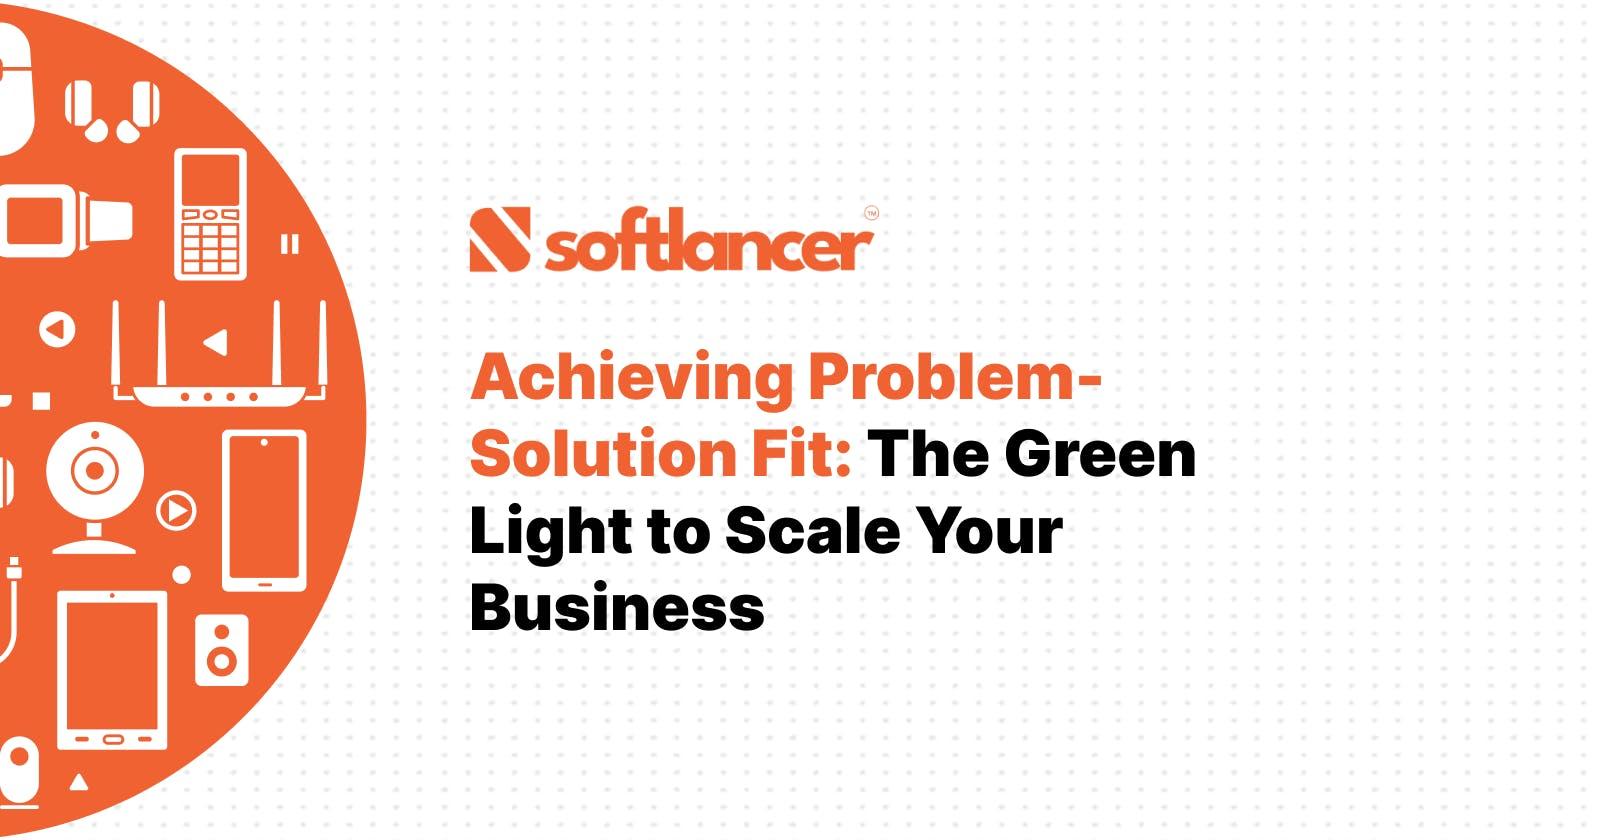 Achieving Problem-Solution Fit: The Green Light to Scale Your Business